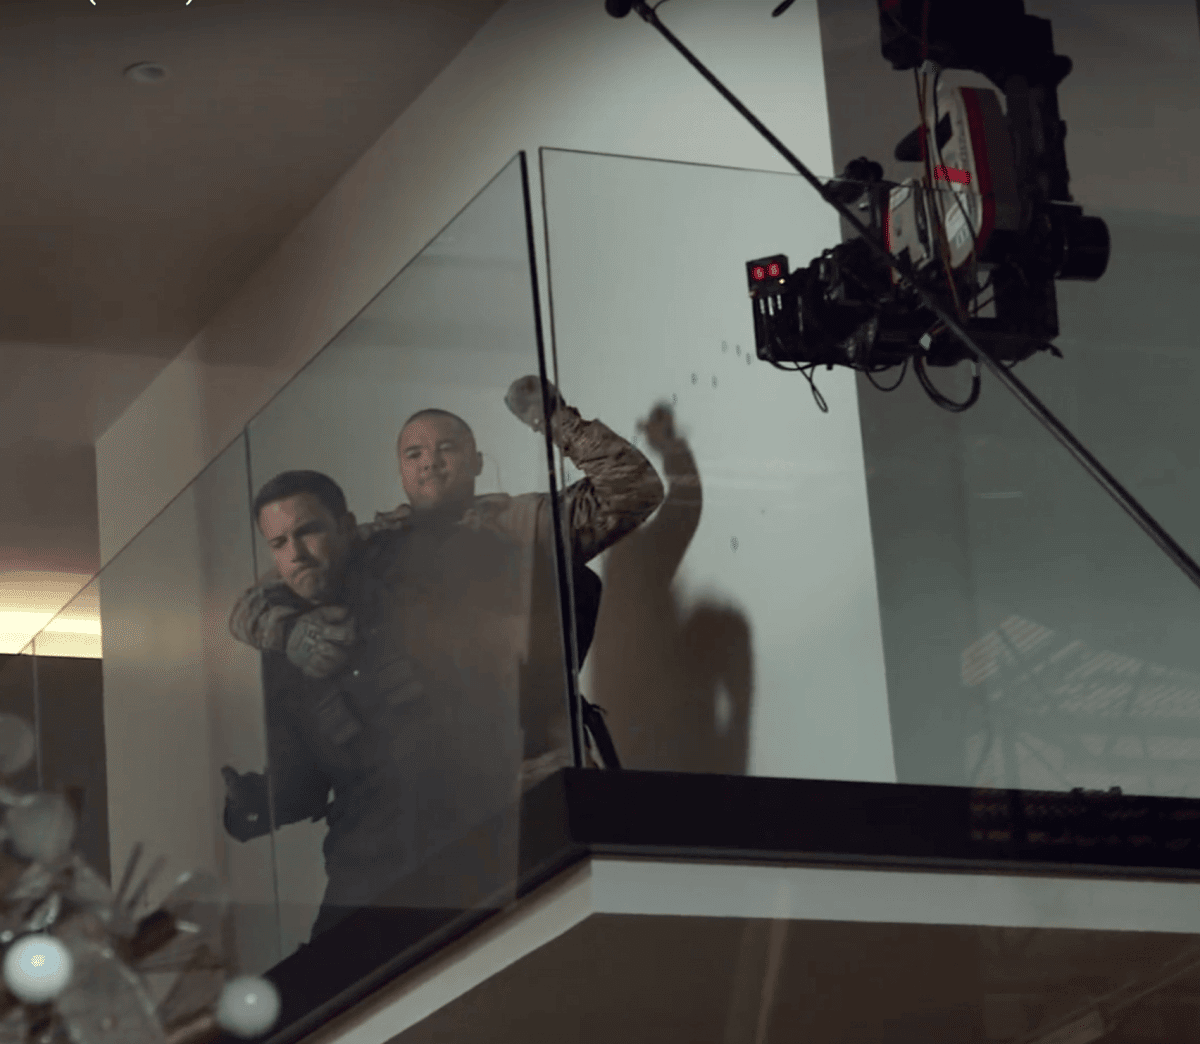 The Lambda shooting an action scene with Ben Affleck for The Accountant.